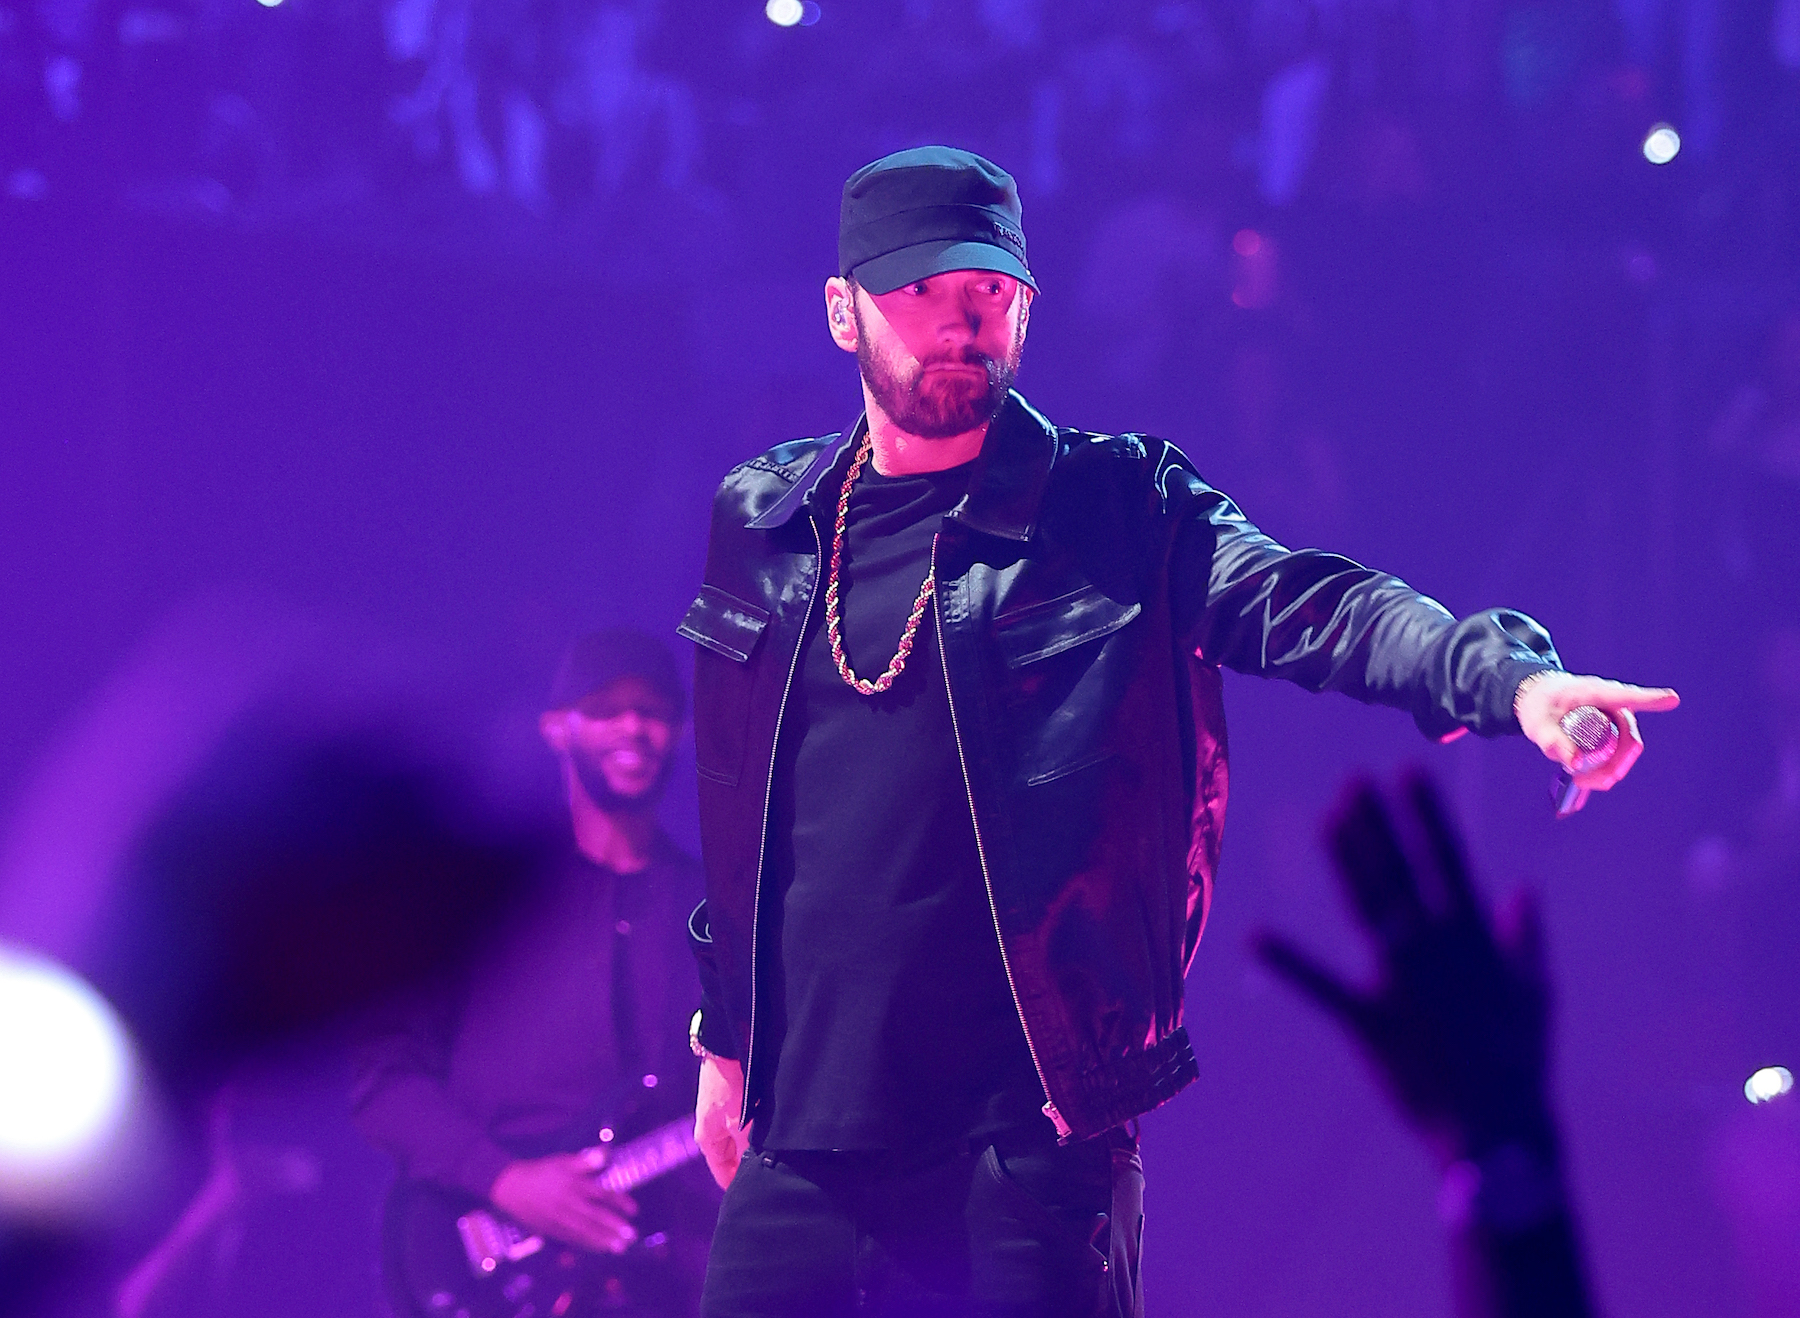 Eminem, who has had many hit songs over the years, wearing a black leather jacket and performing.